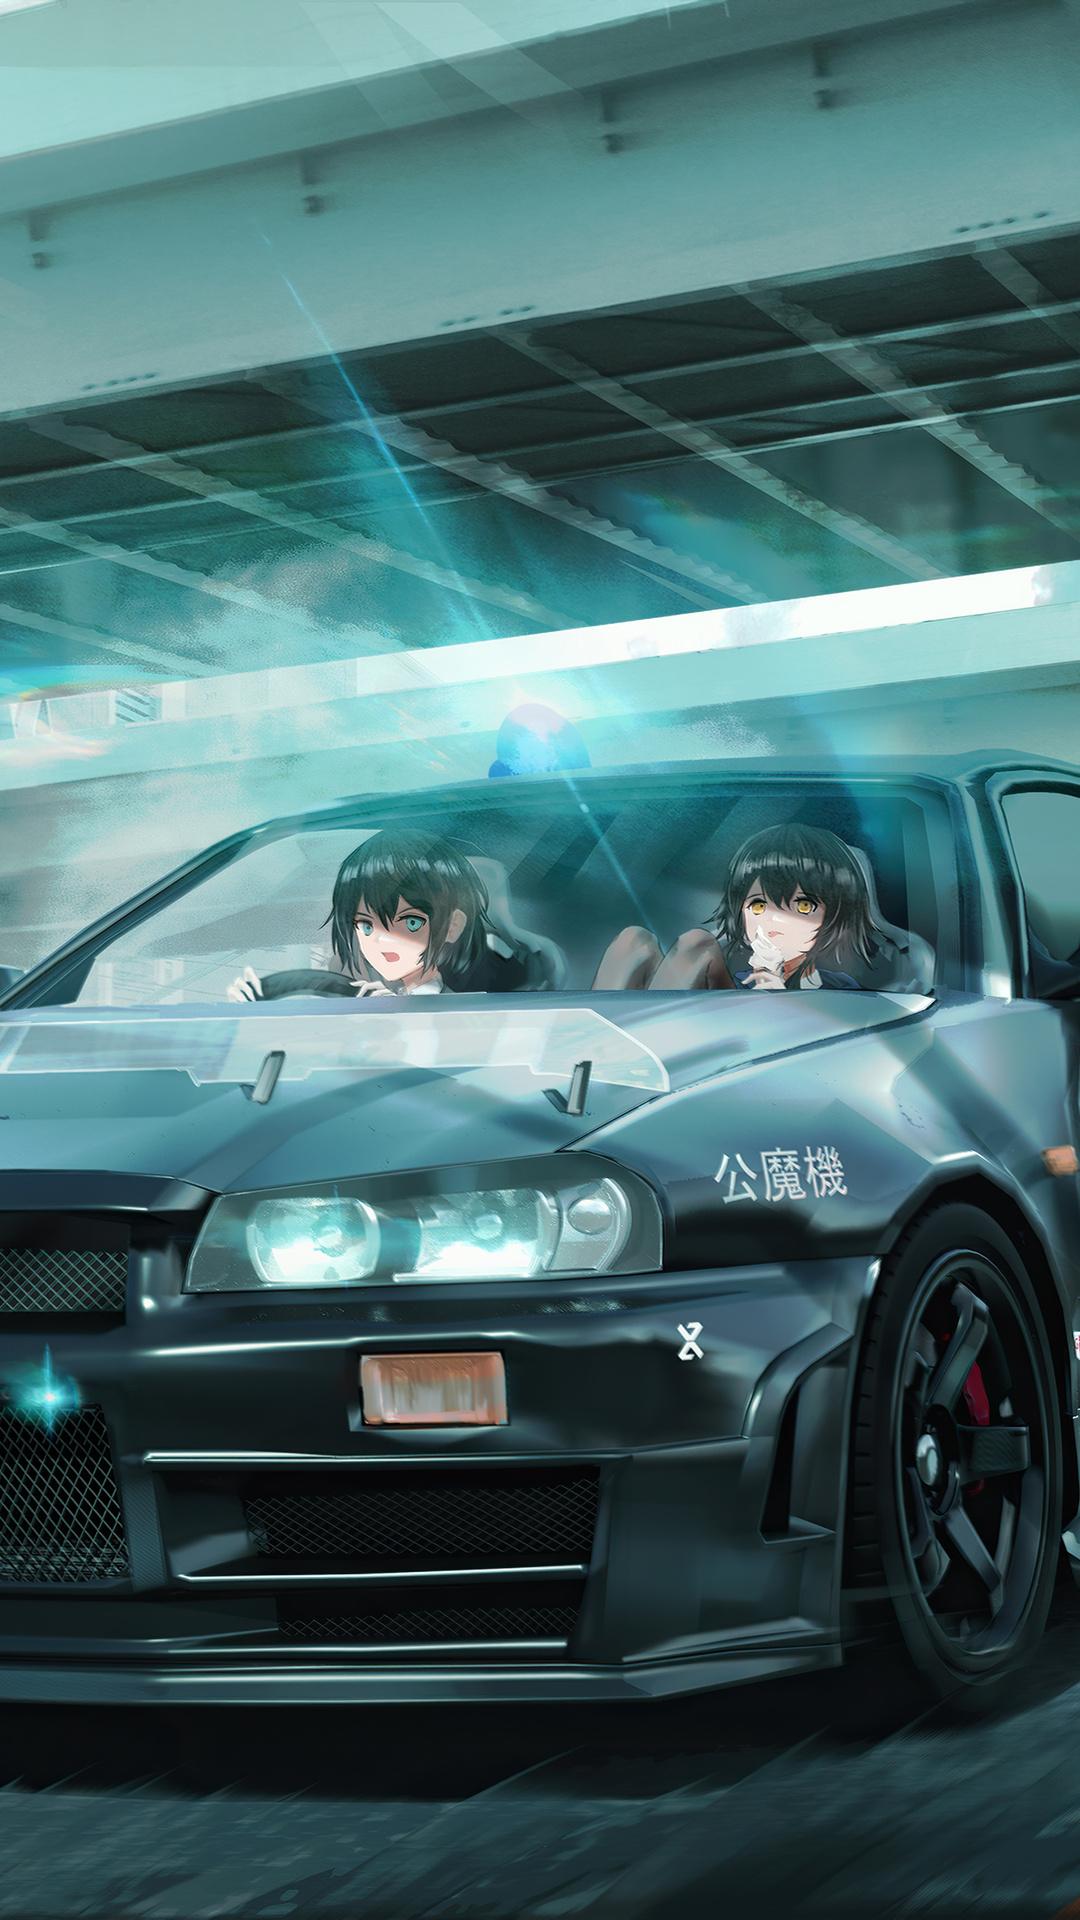 Jdm Anime Wallpapers Top Free Jdm Anime Backgrounds Wallpaperaccess 8708